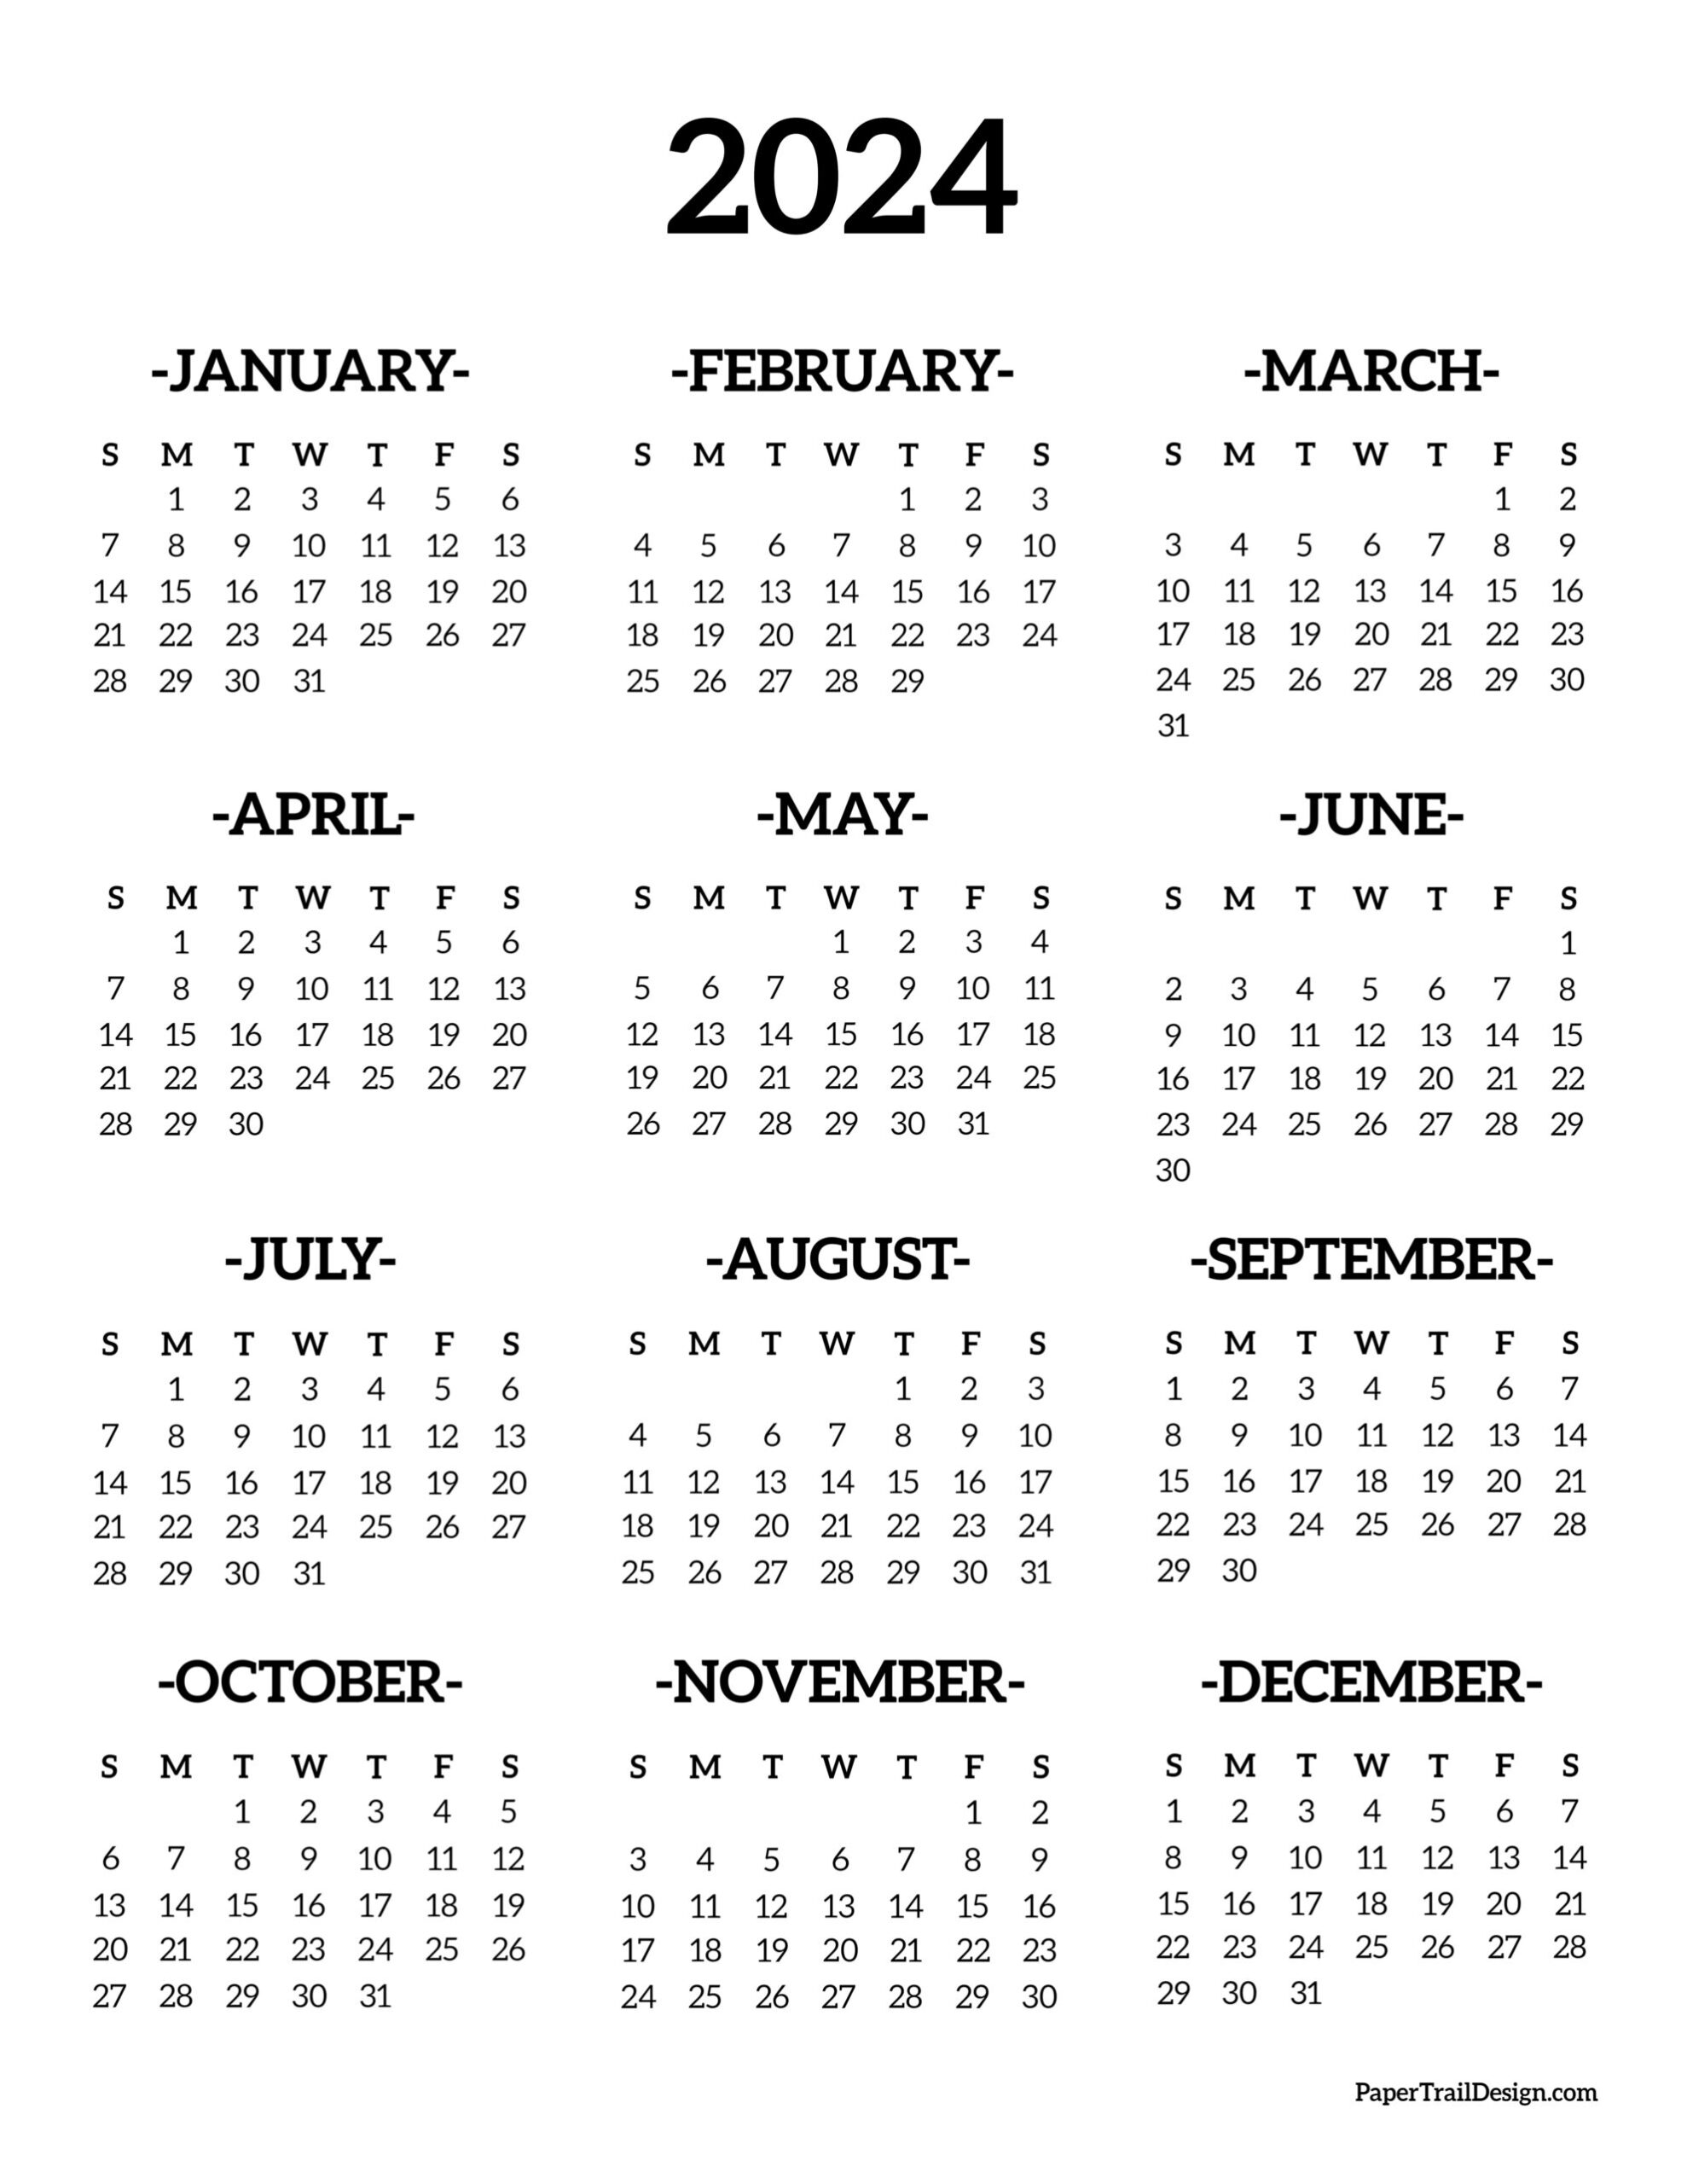 Calendar 2024 Printable One Page - Paper Trail Design for 2024 Printable Calendar One Page Monday Start